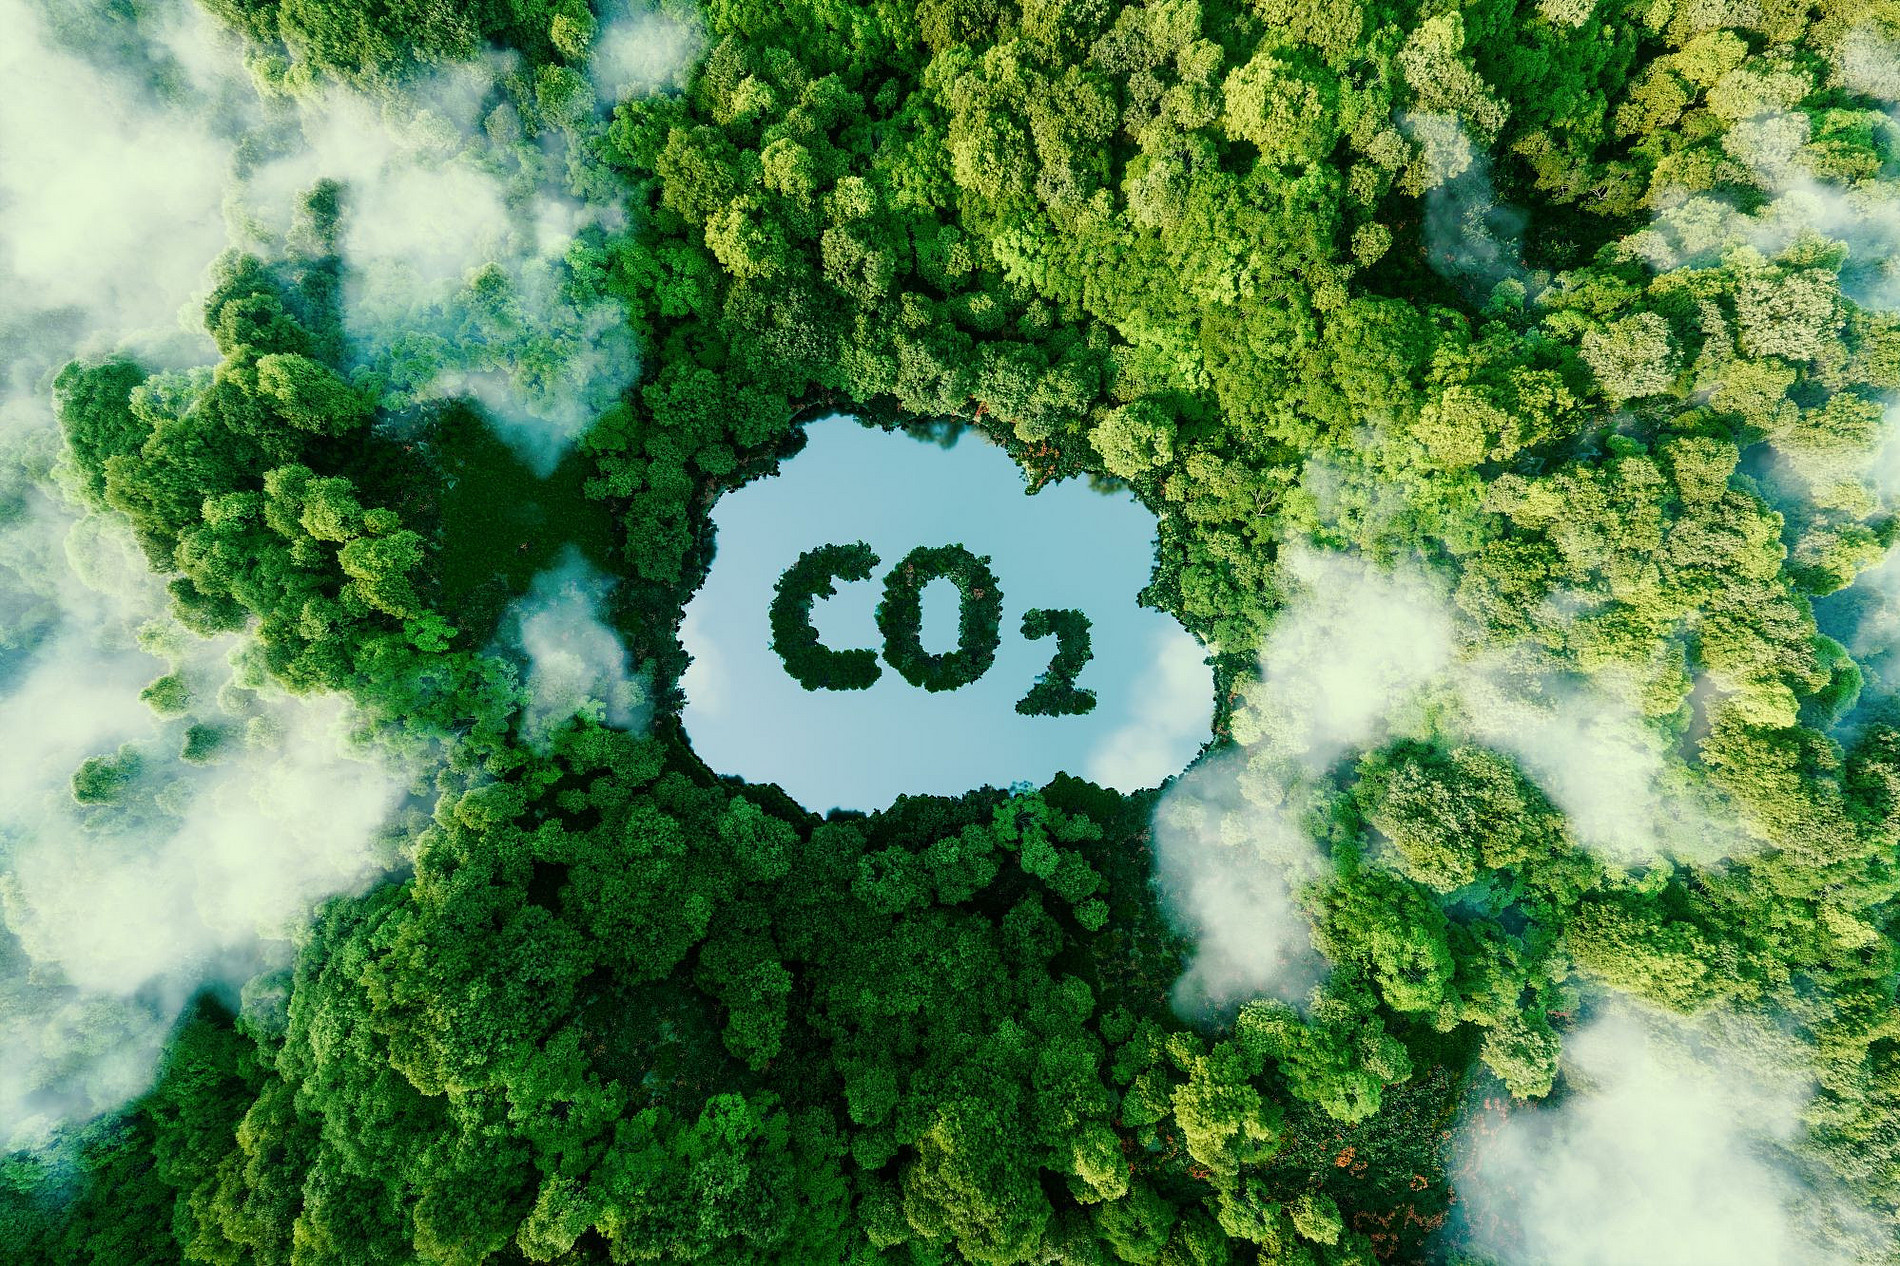 Subject photo for the EAERE Summer School 2021: Concept depicting the problem of carbon dioxide emissions and their impact on nature in the form of a pond in the shape of a CO2 symbol in a lush forest. 3d rendering. ©Лилия Захарчук - adobe.stock.com